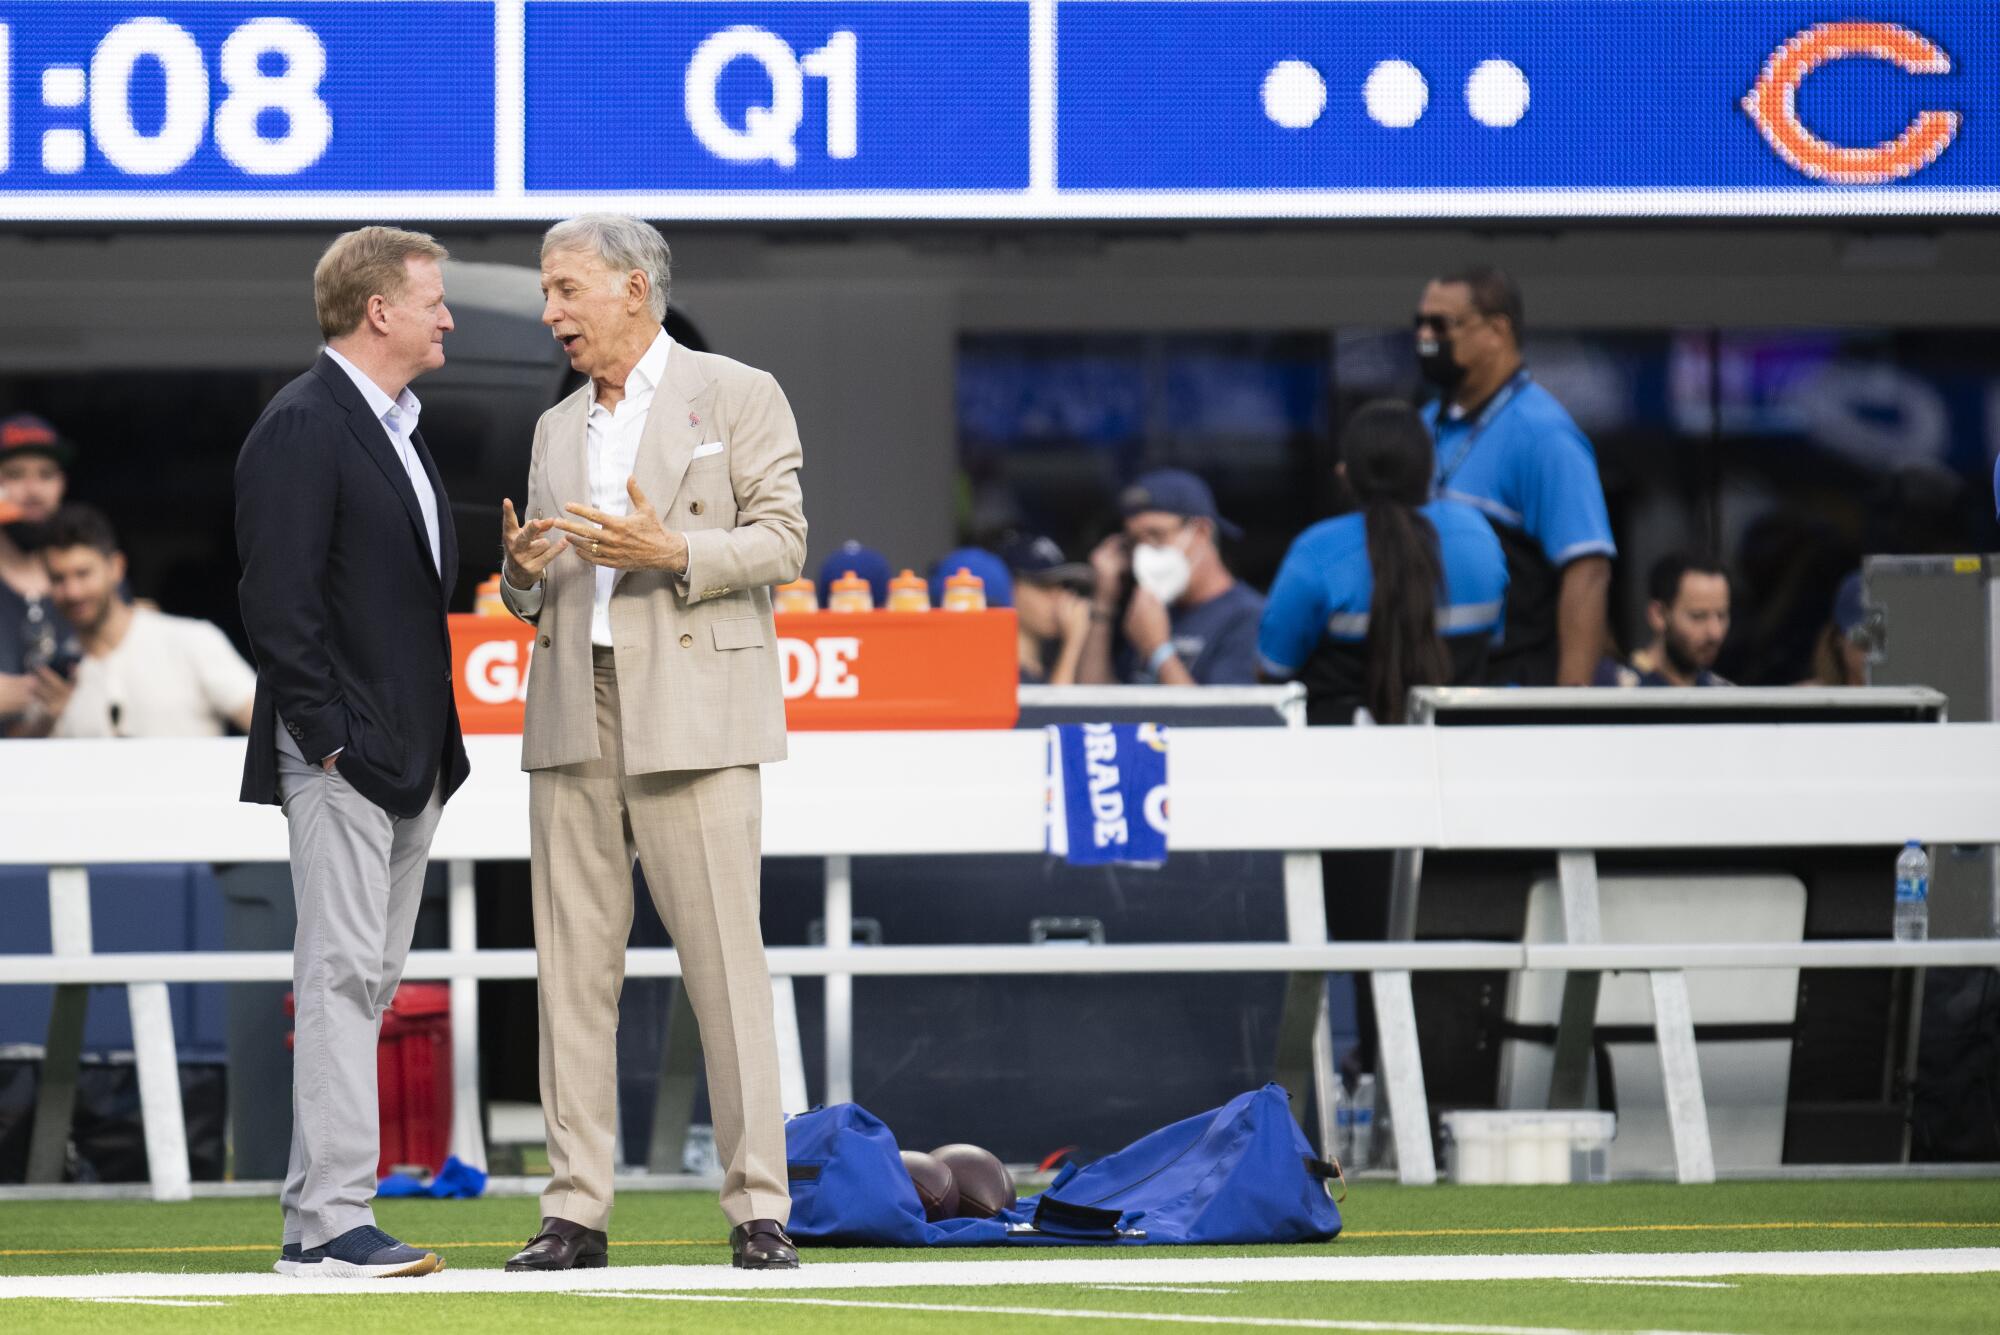 Rams owner Stan Kroenke and NFL commissioner Roger Goodell chat during a game.